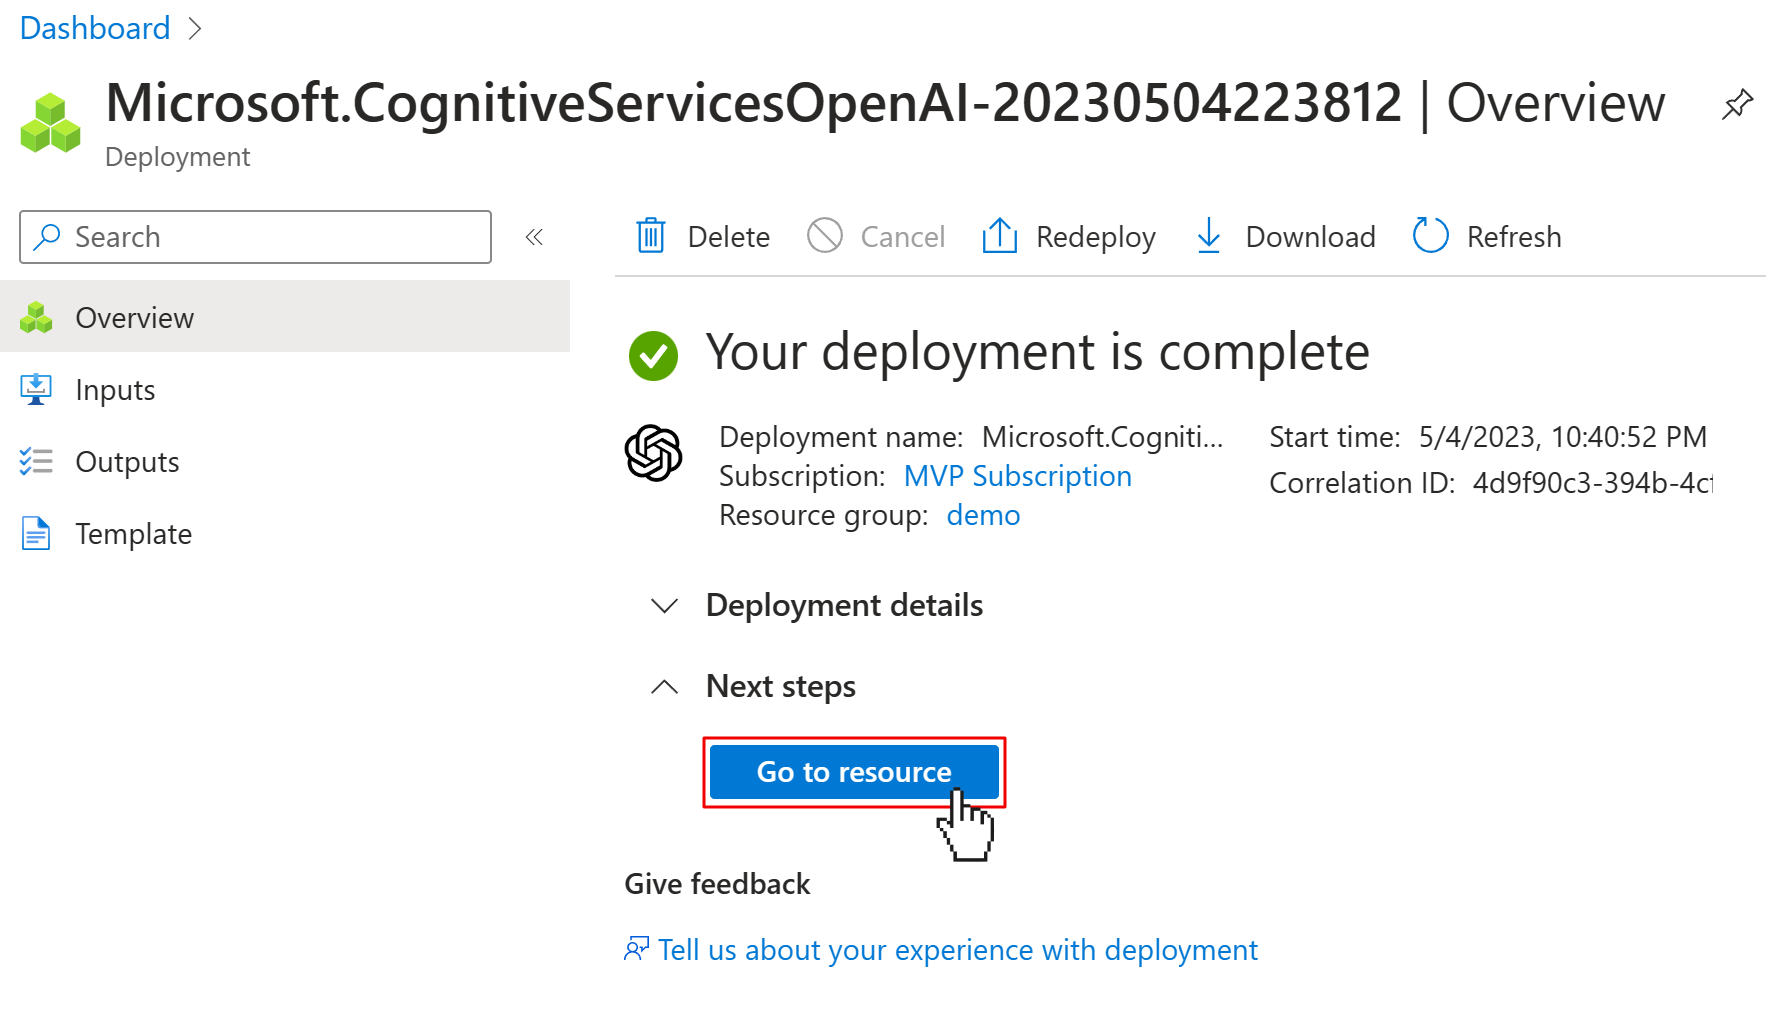 Azure deployment screen showing the Azure OpenAI service has been deployed. User clicks on "Go to resource" button.